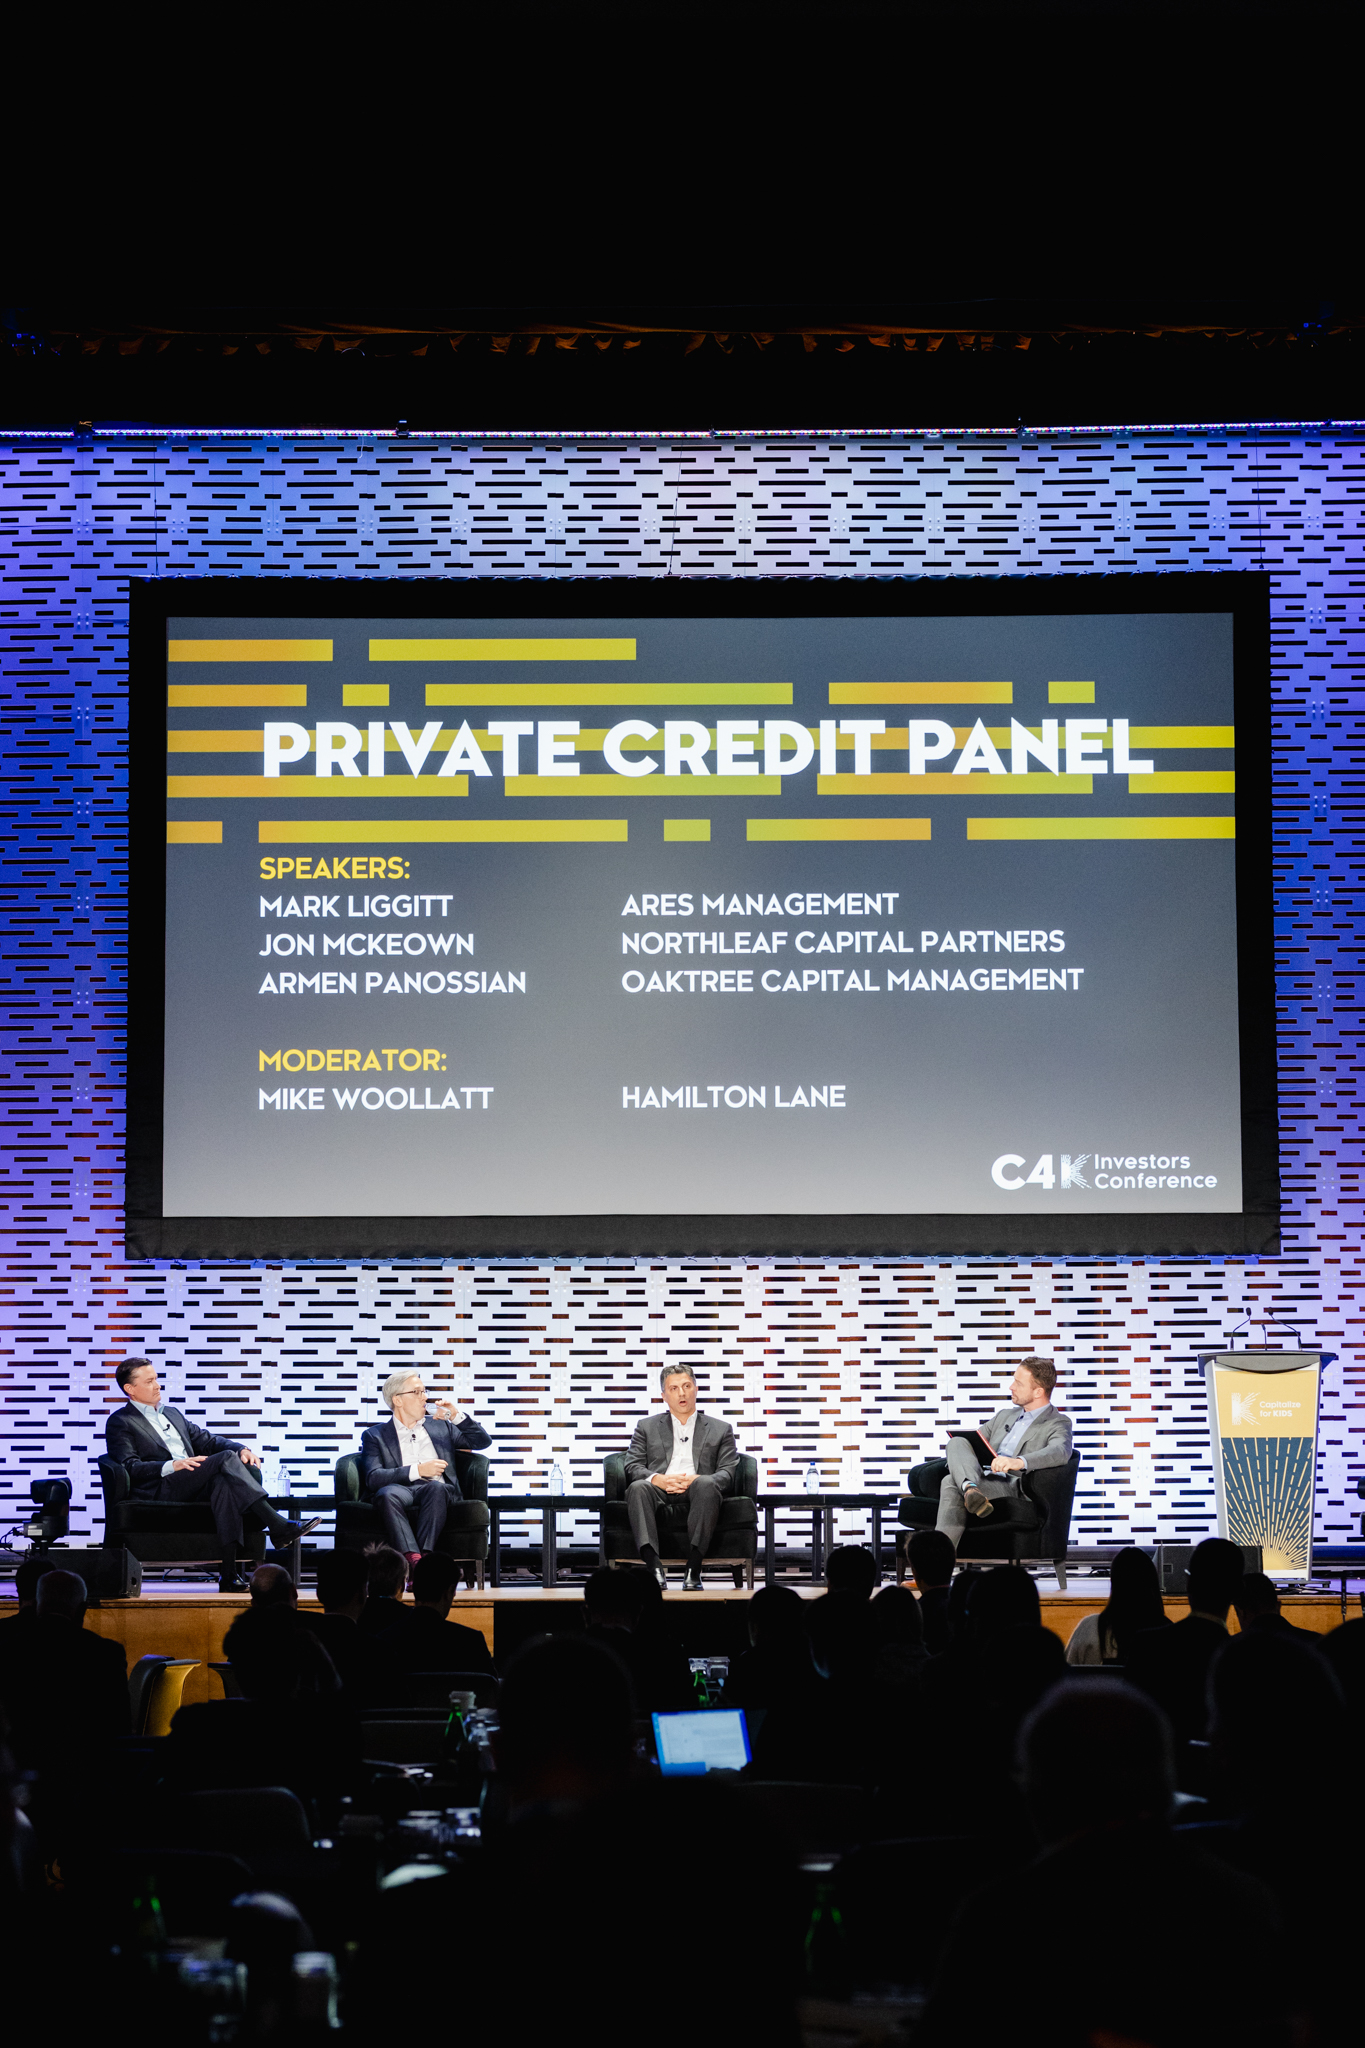 Conference participants on stage at a private credit panel.